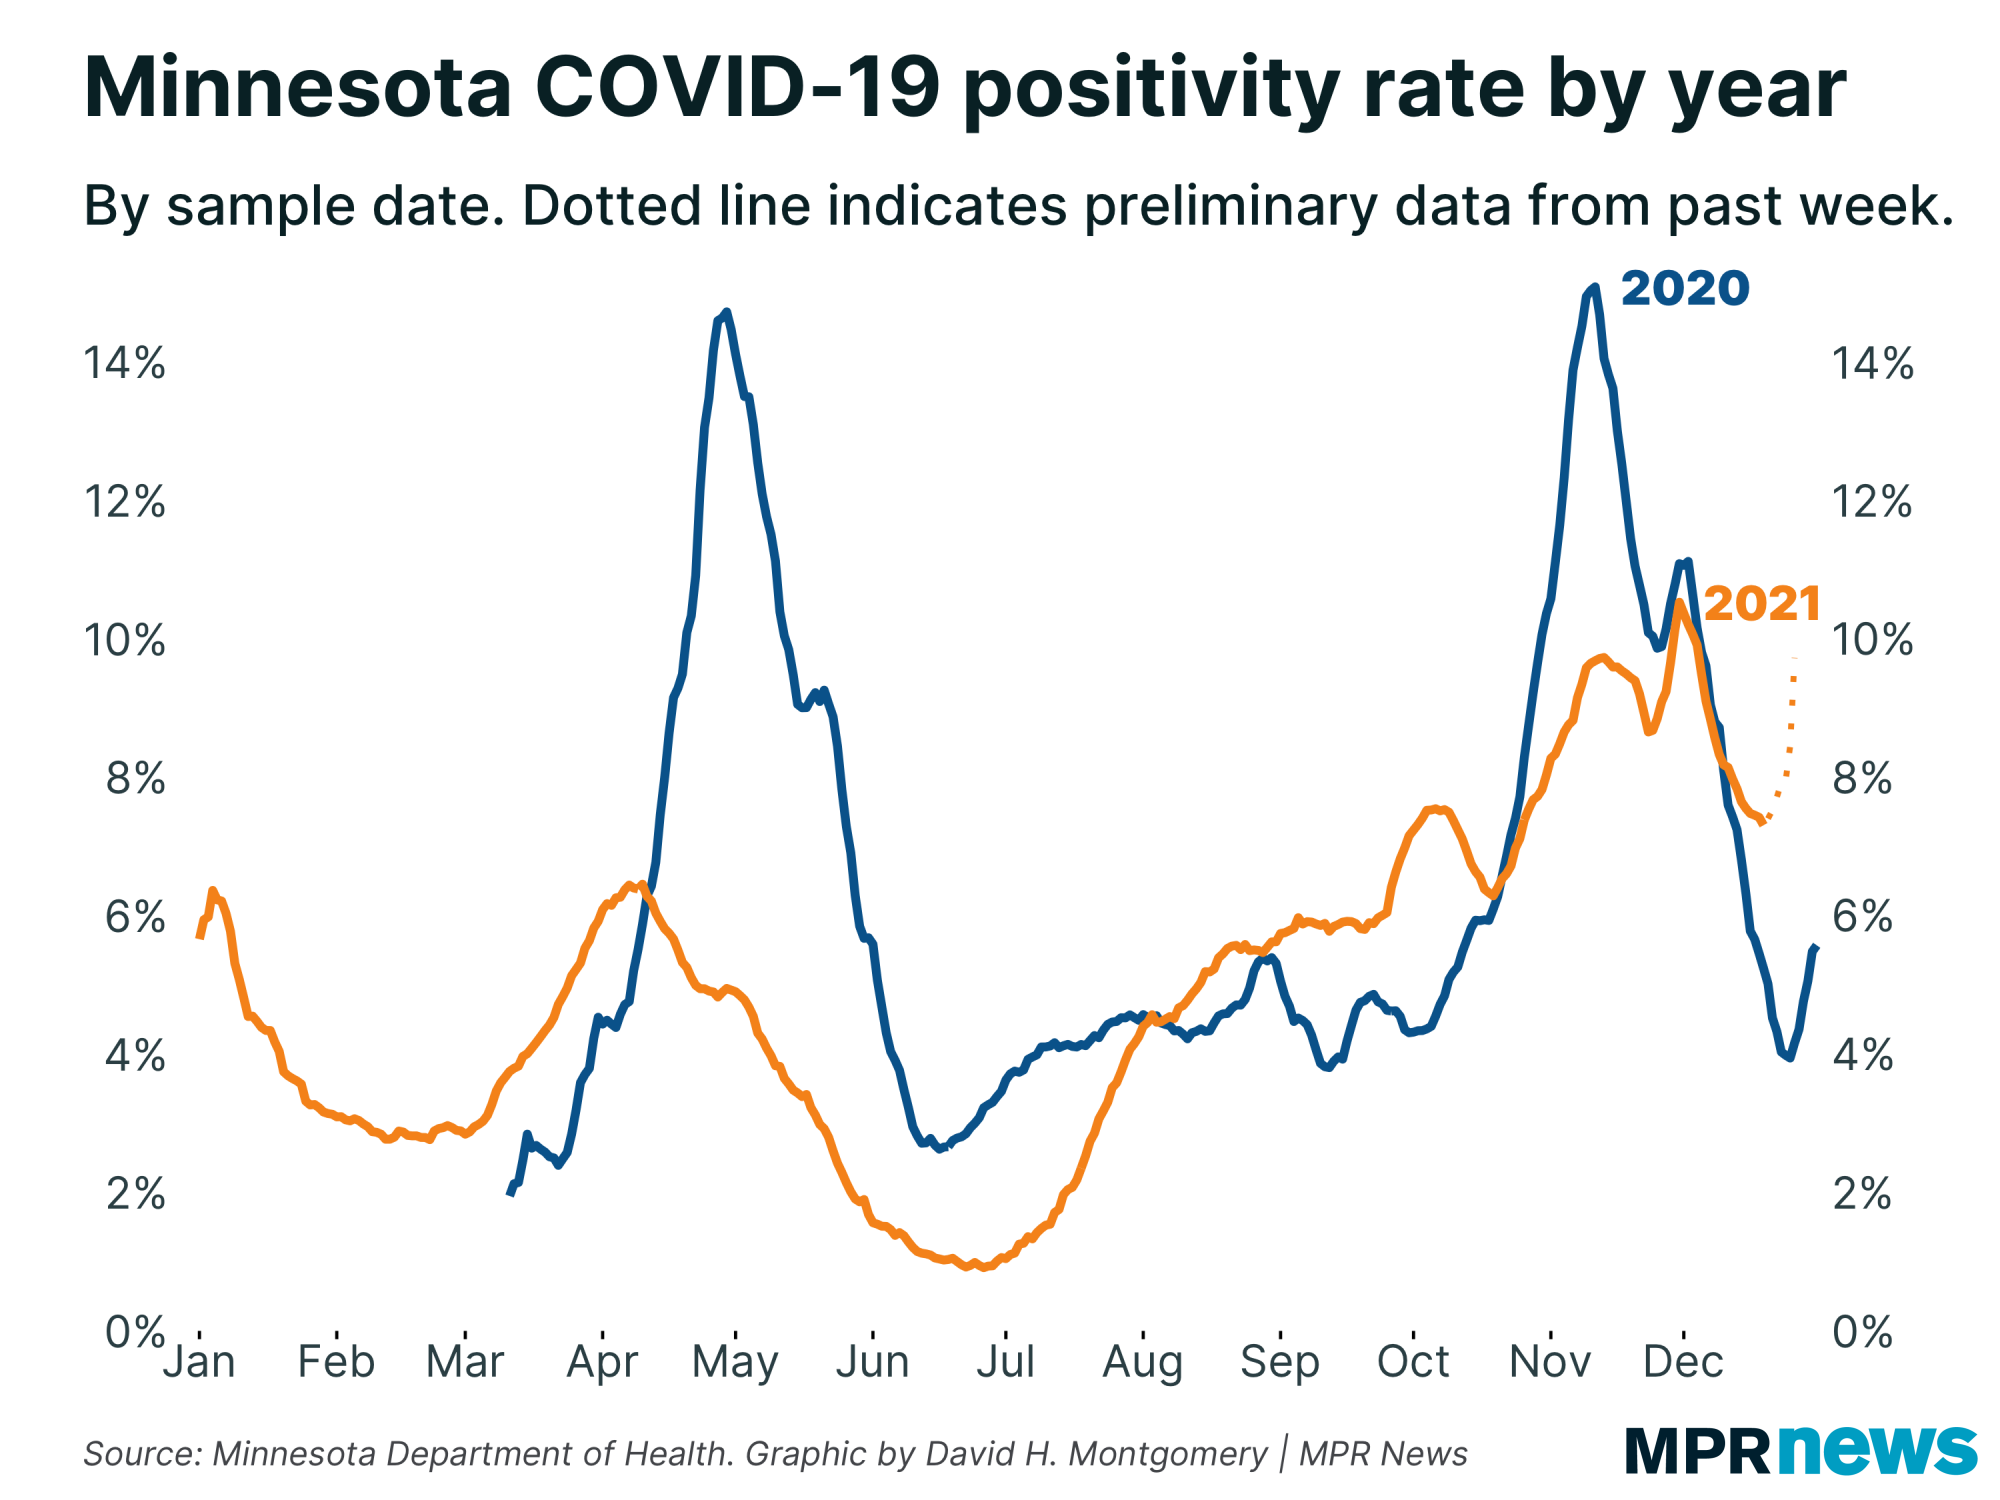 Graph of Minnesota's COVID-19 positivity rate by year by sample date